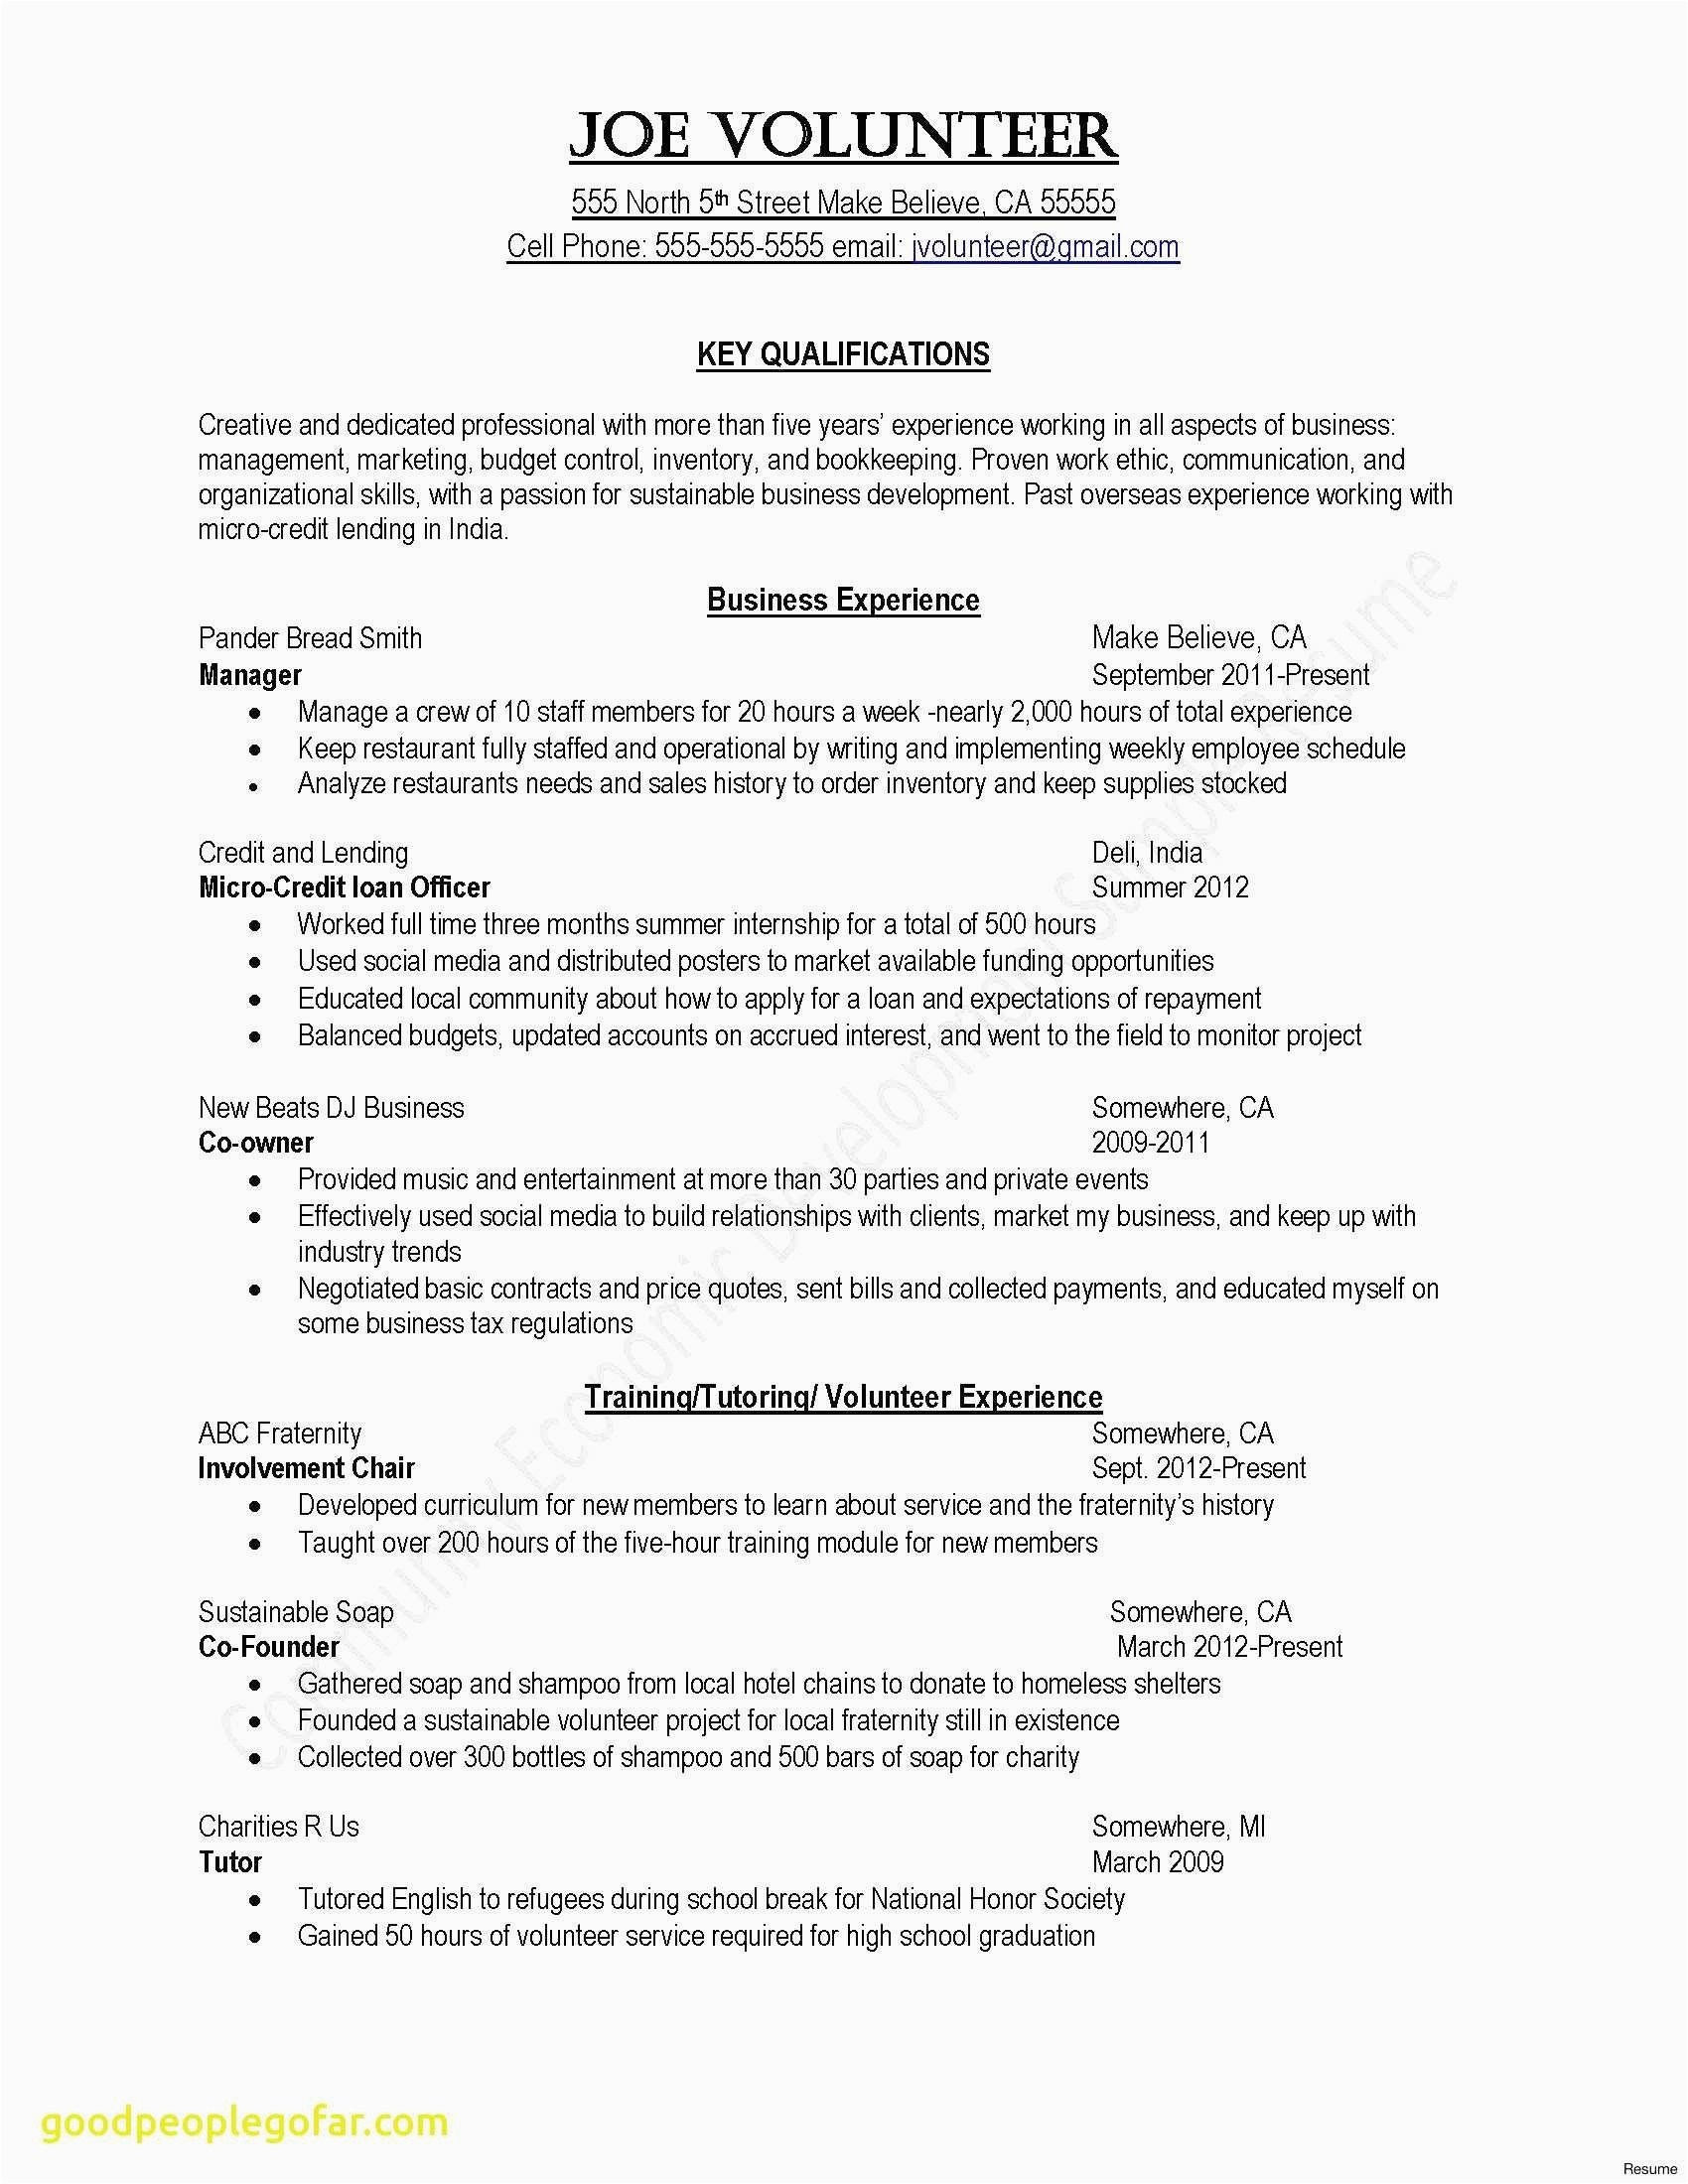 bauer college of business resume template